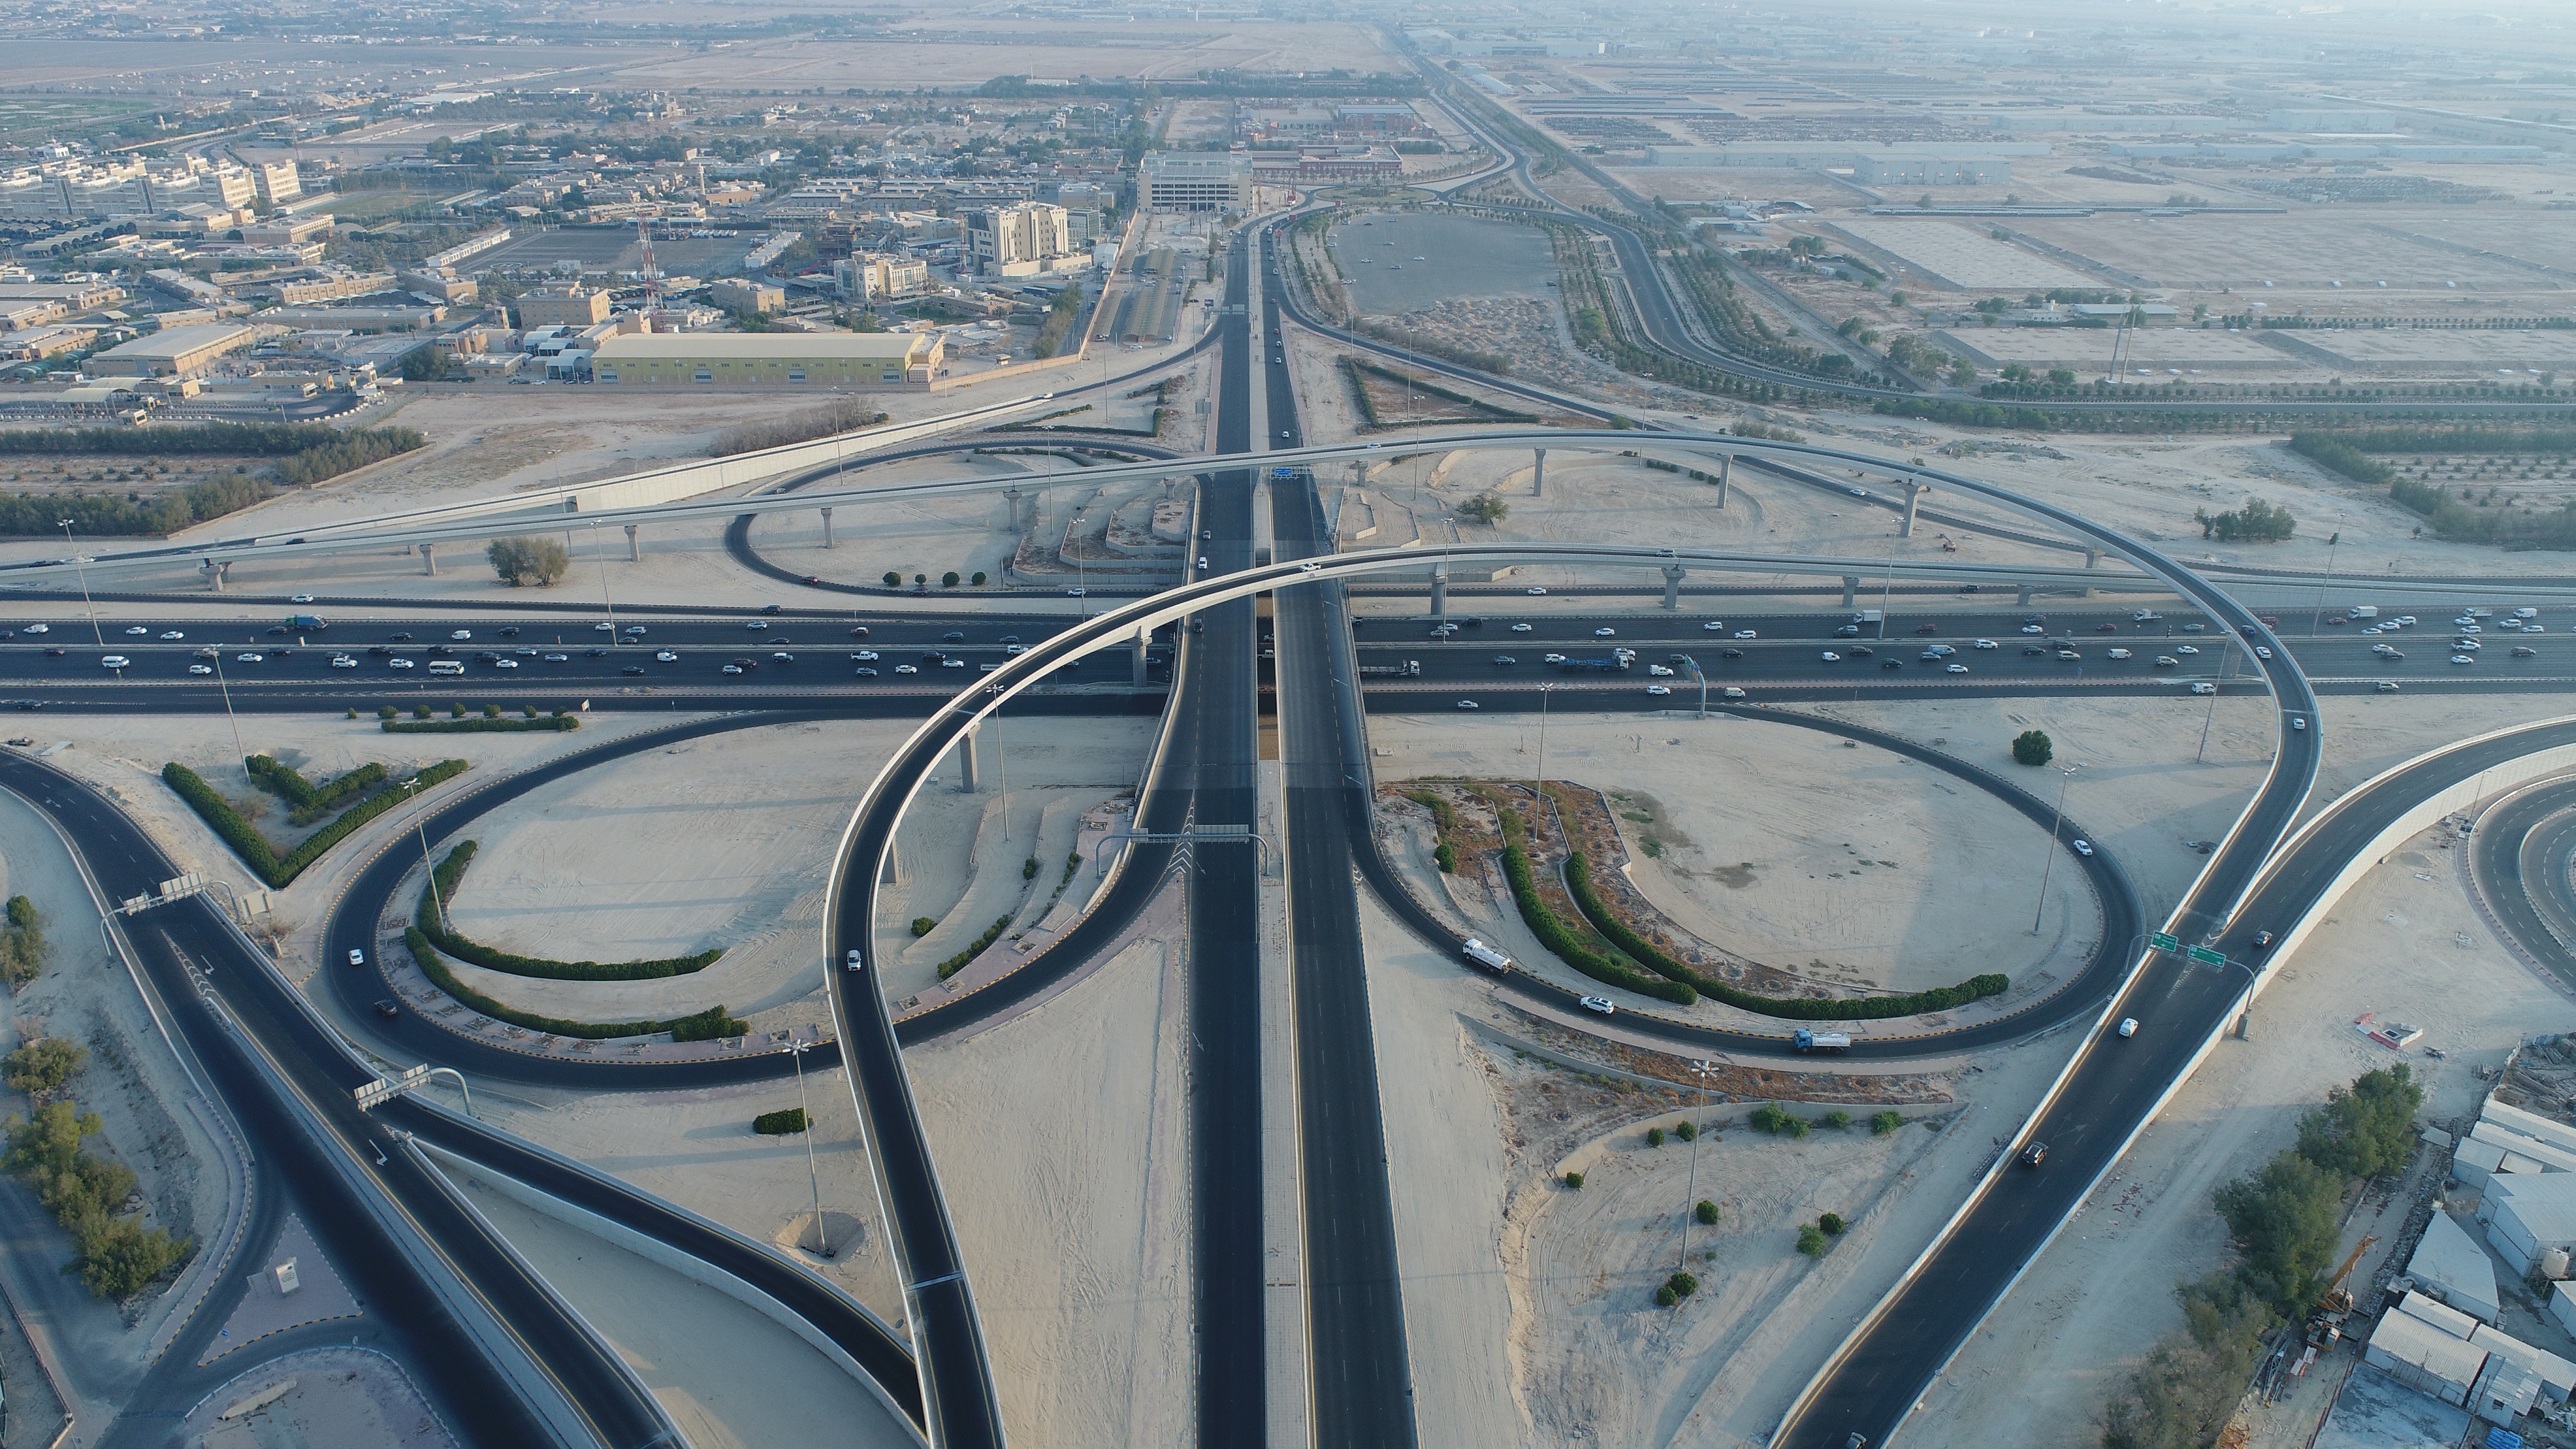 Another interchange in the project